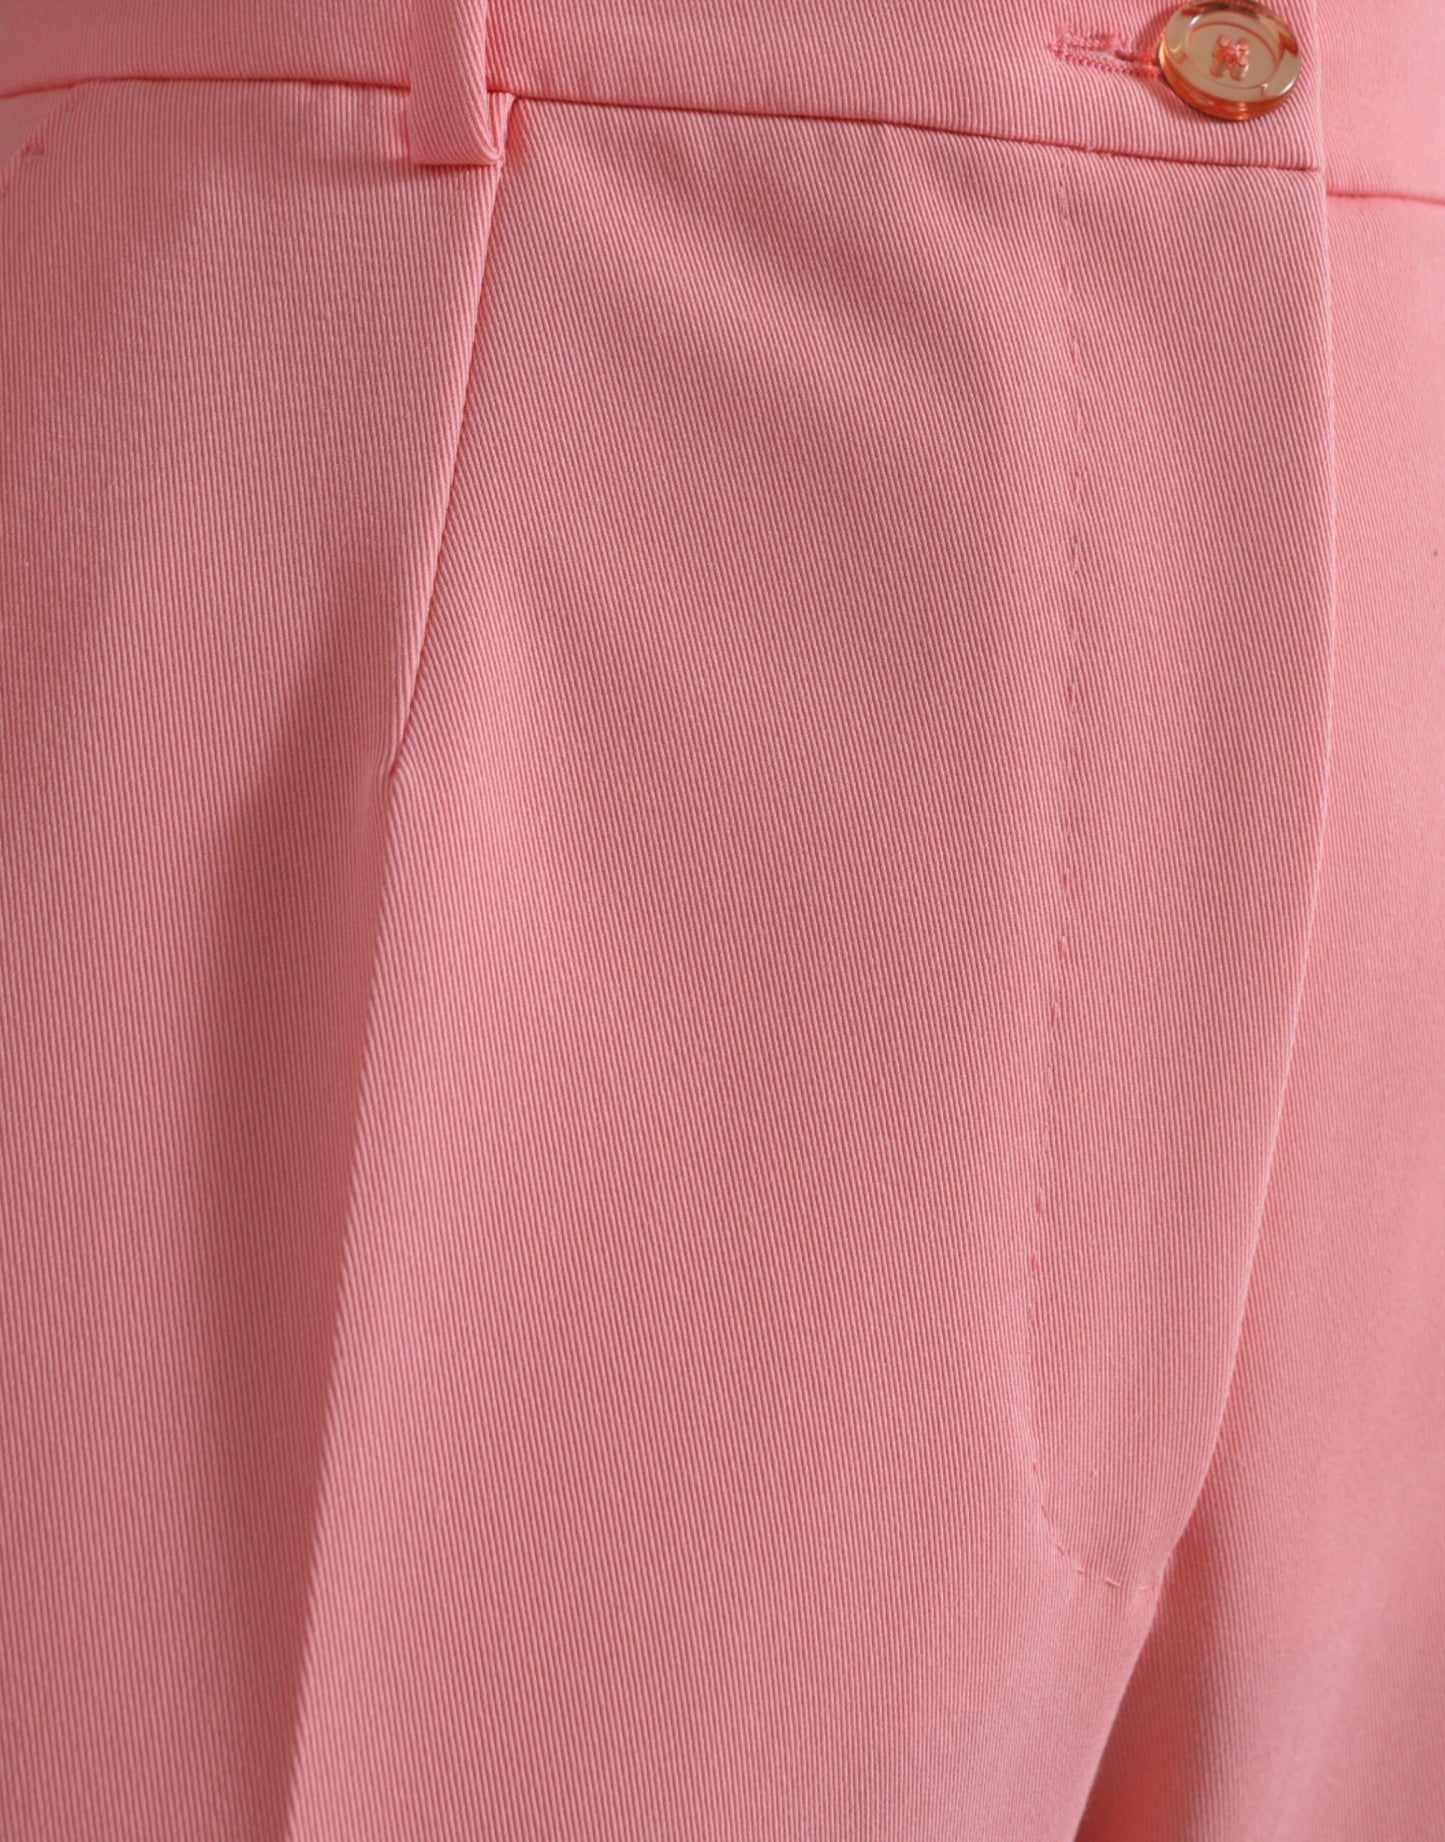 Elegant High Waist Tapered Pants in Pink